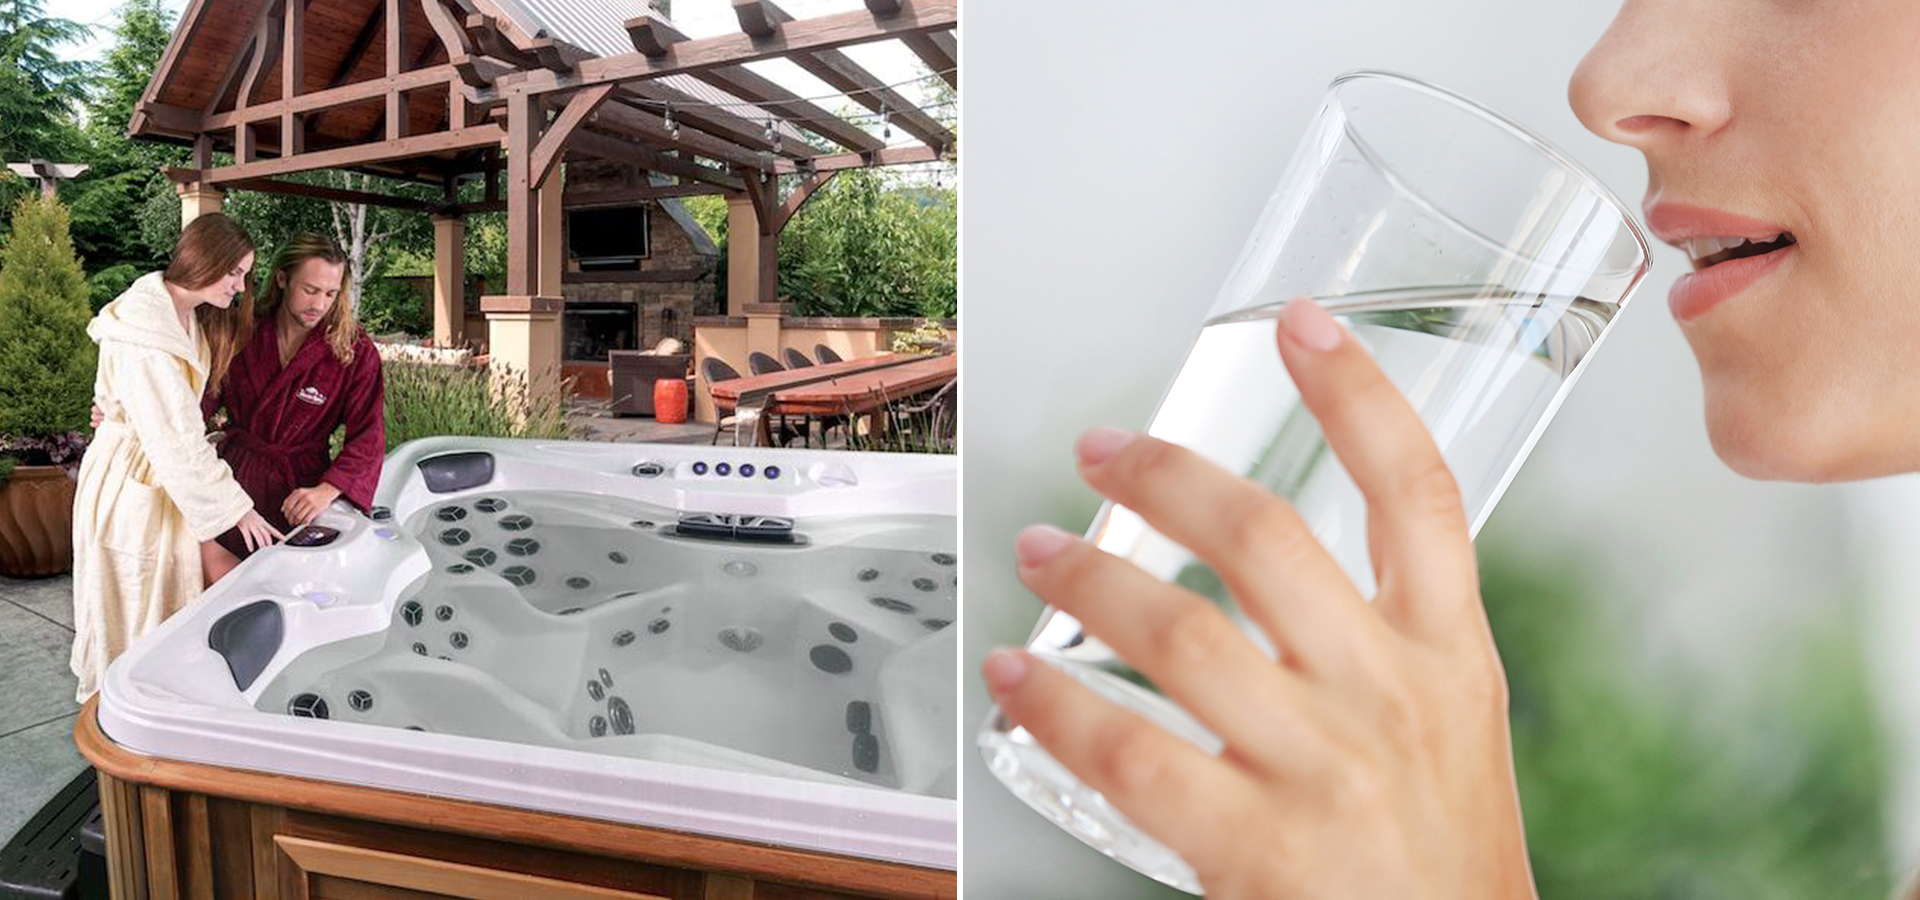 An image of a man and woman by a hot tub on the left, and a woman drinking water on the right 